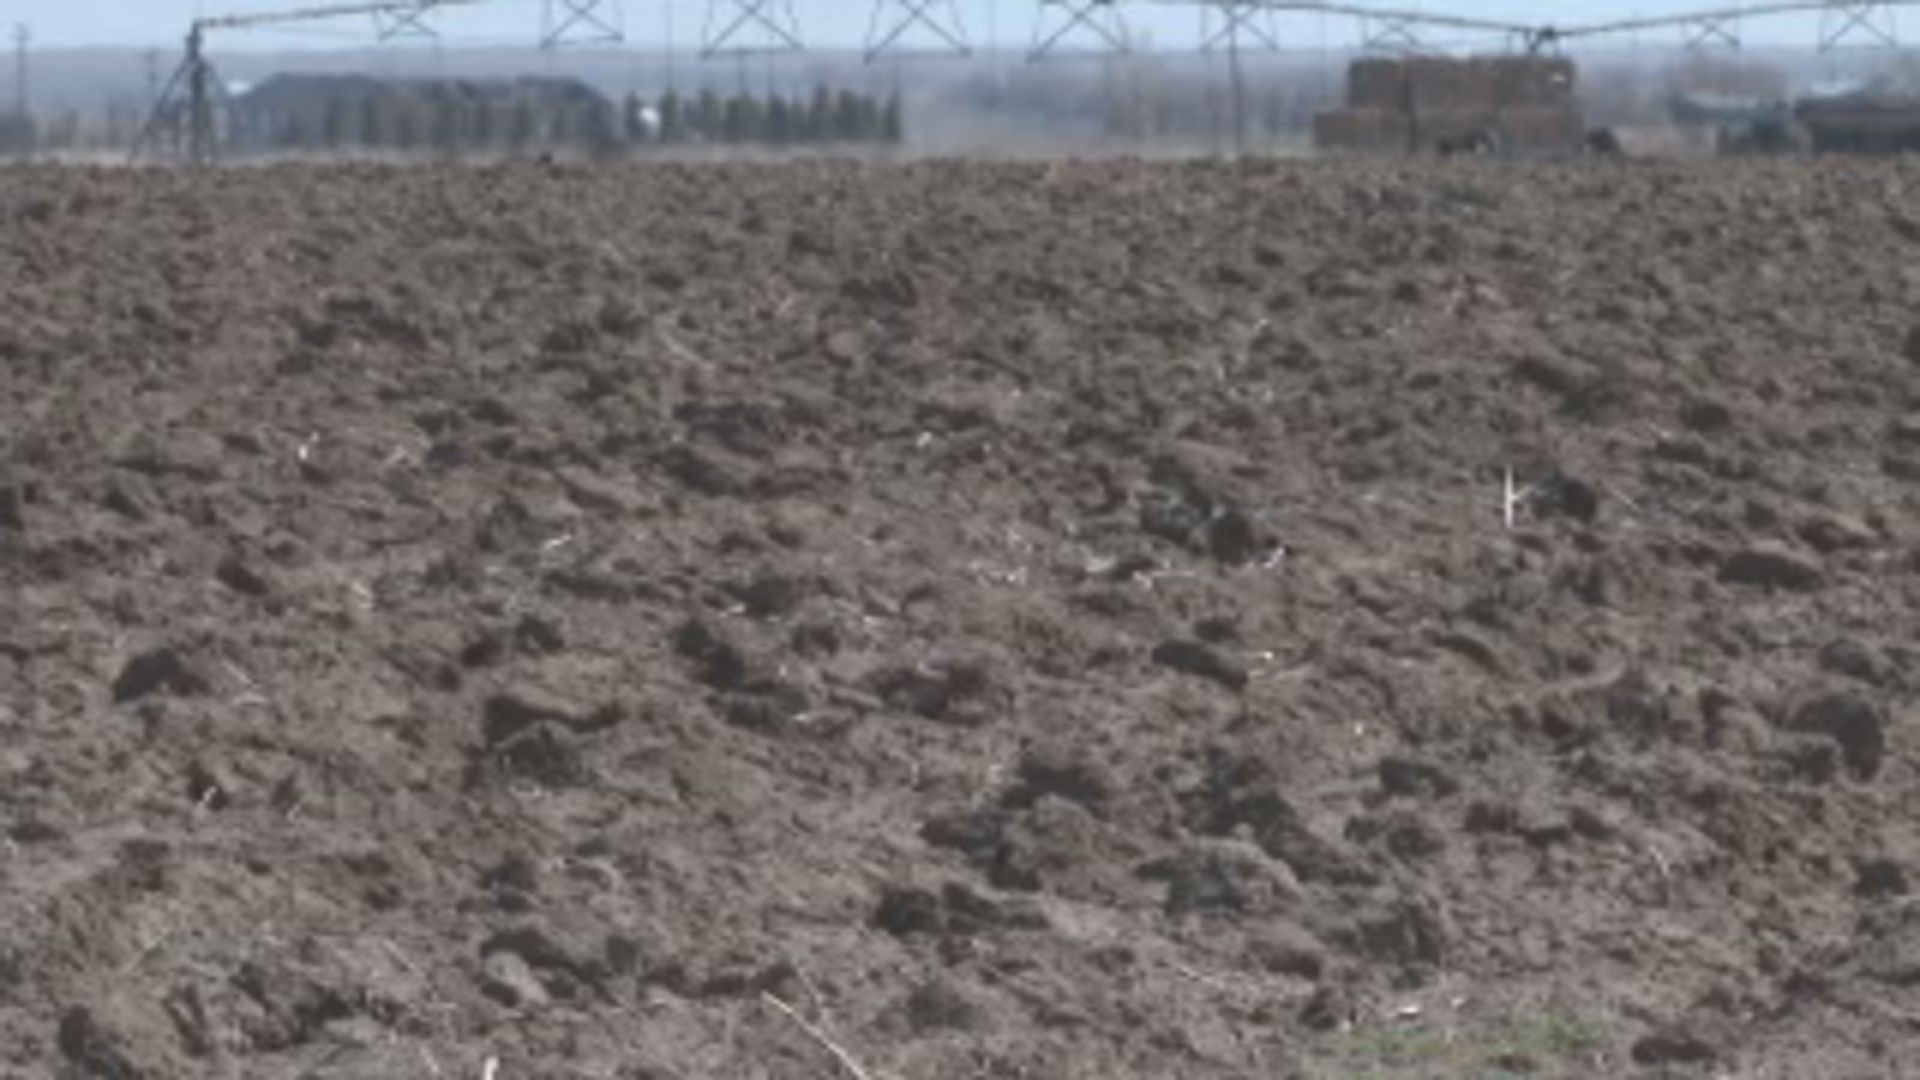 Alberta farmers adapting to province’s growing drought concerns